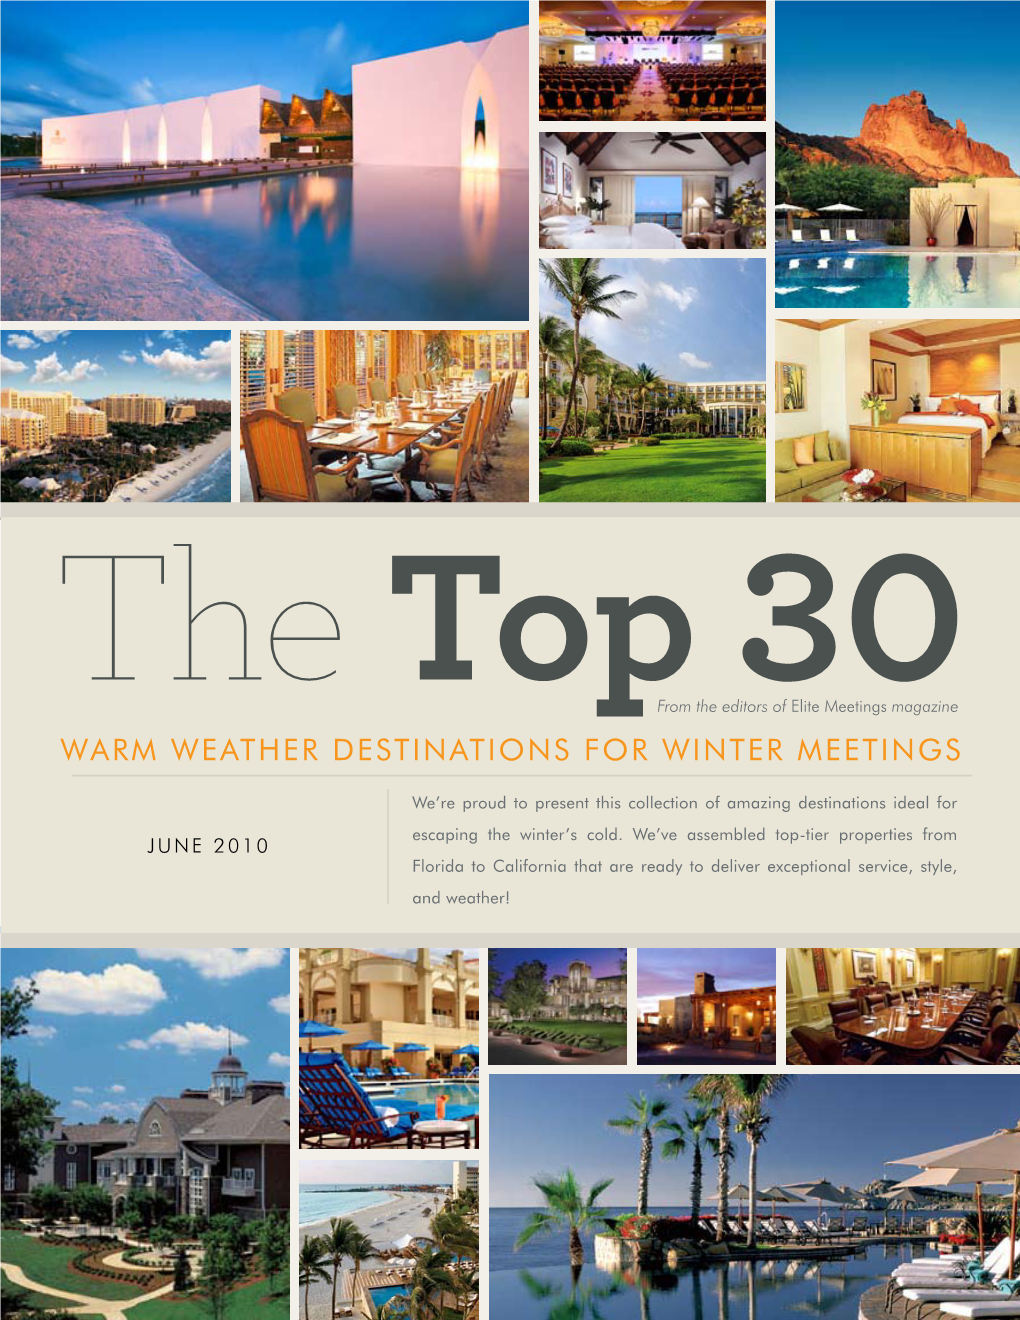 Warm Weather Destinations for Winter Meetings